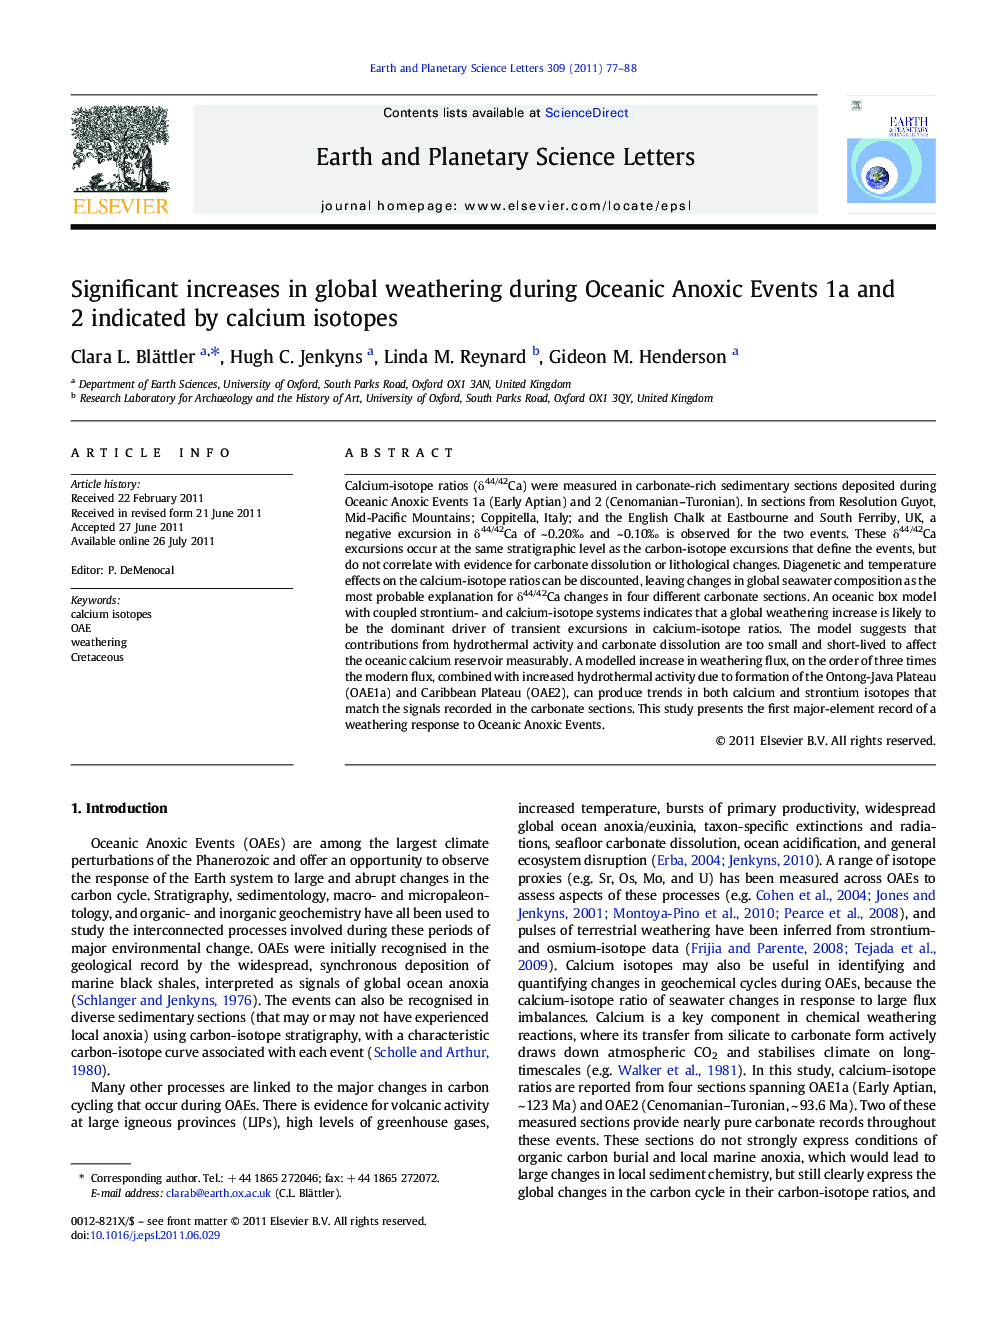 Significant increases in global weathering during Oceanic Anoxic Events 1a and 2 indicated by calcium isotopes